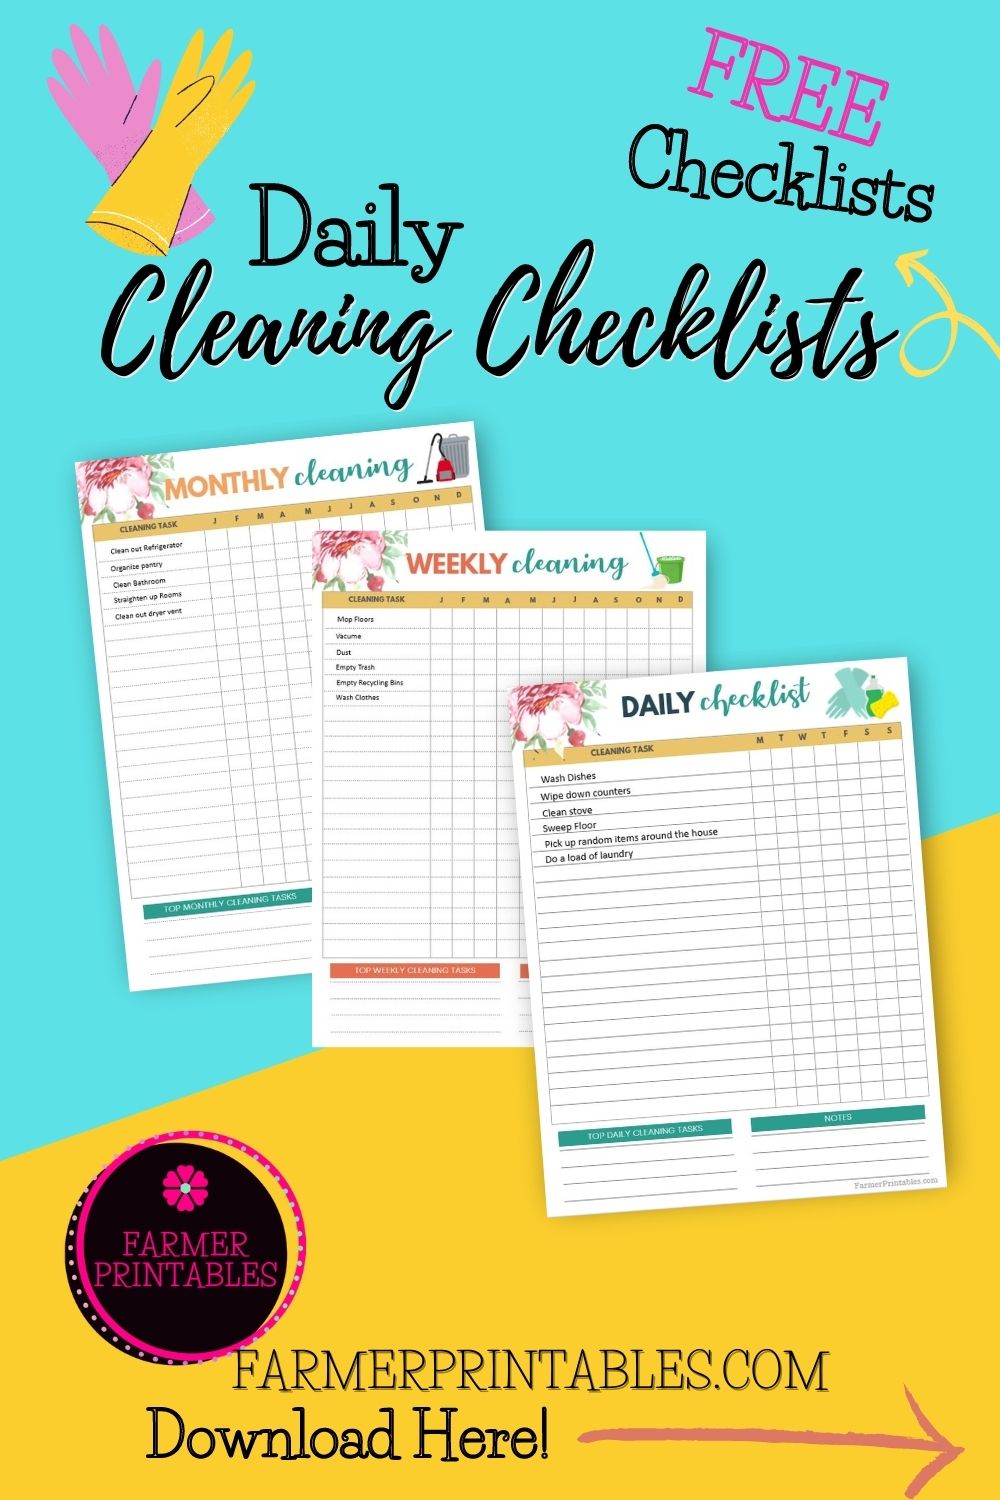 Daily Cleaning Checklists pin